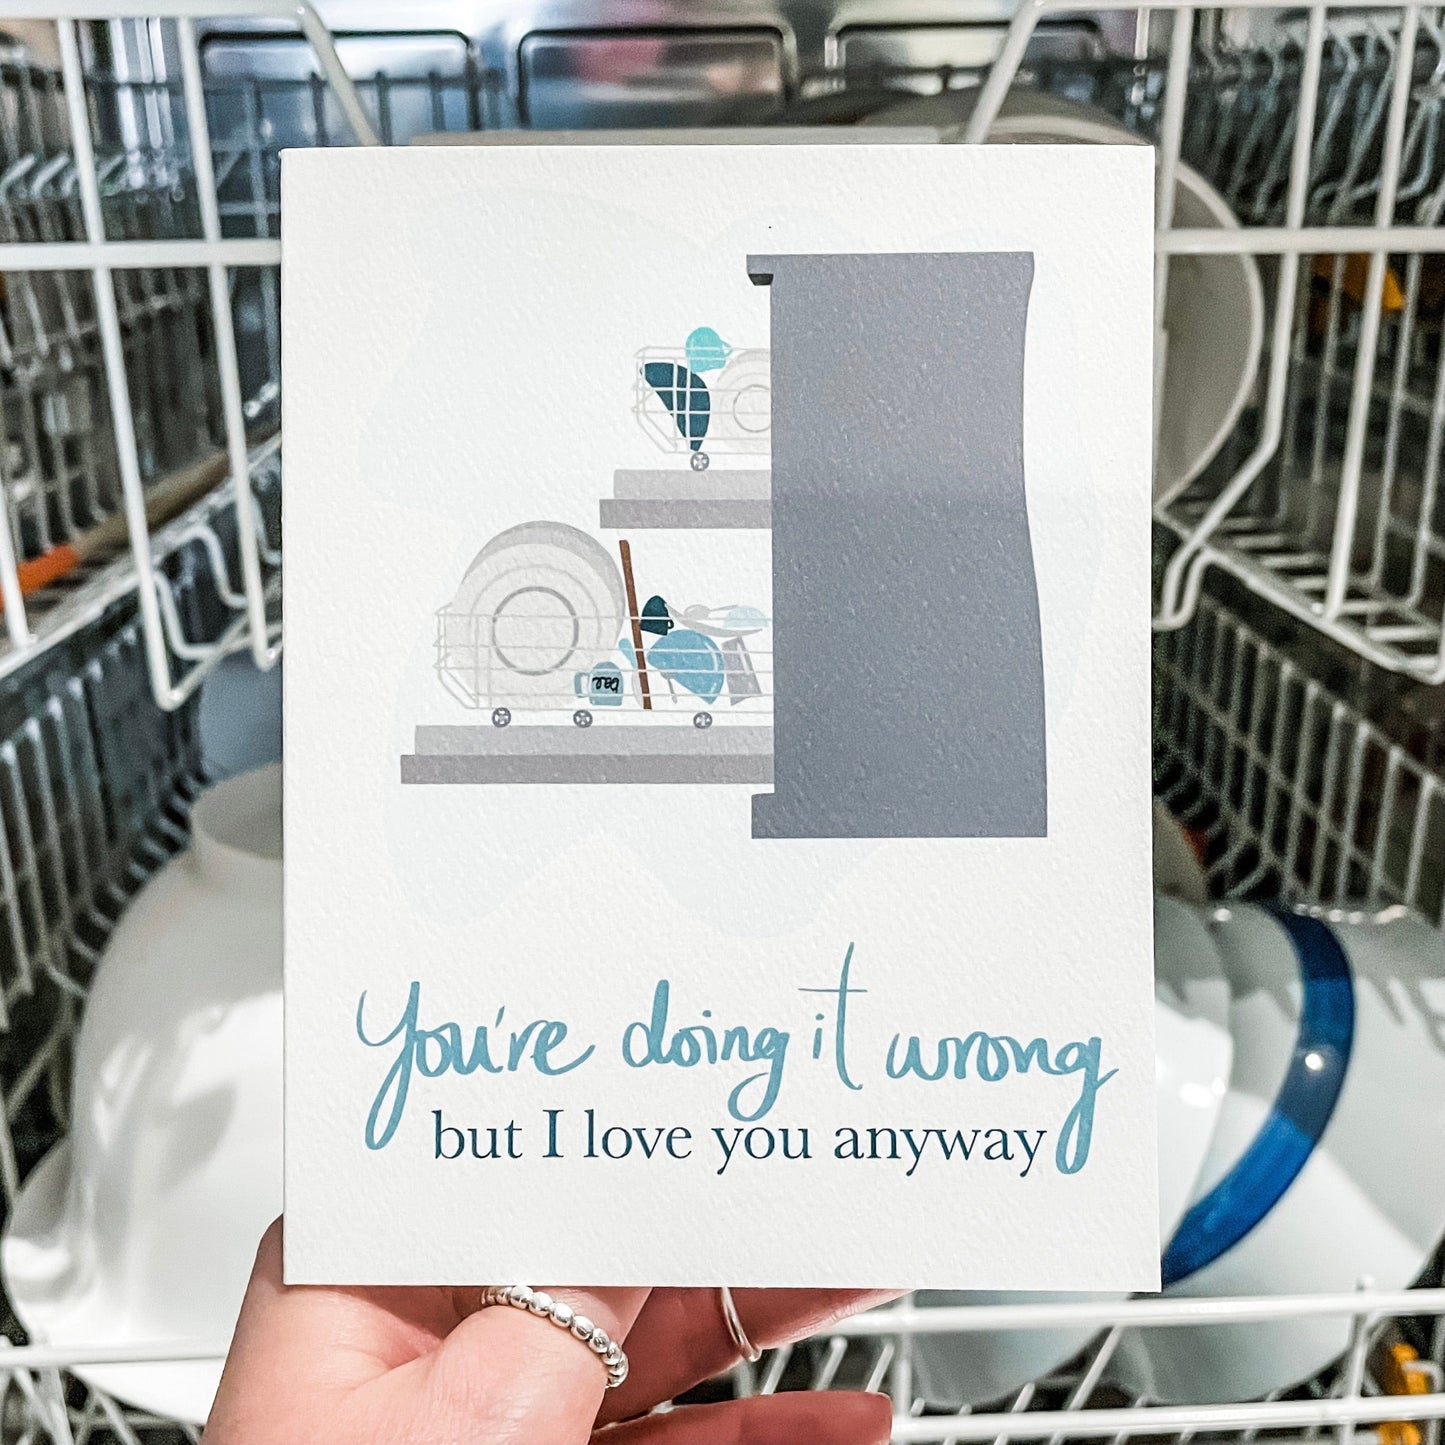 The Dishwasher Card. Funny Greeting Cards. Custom Cards Toronto.